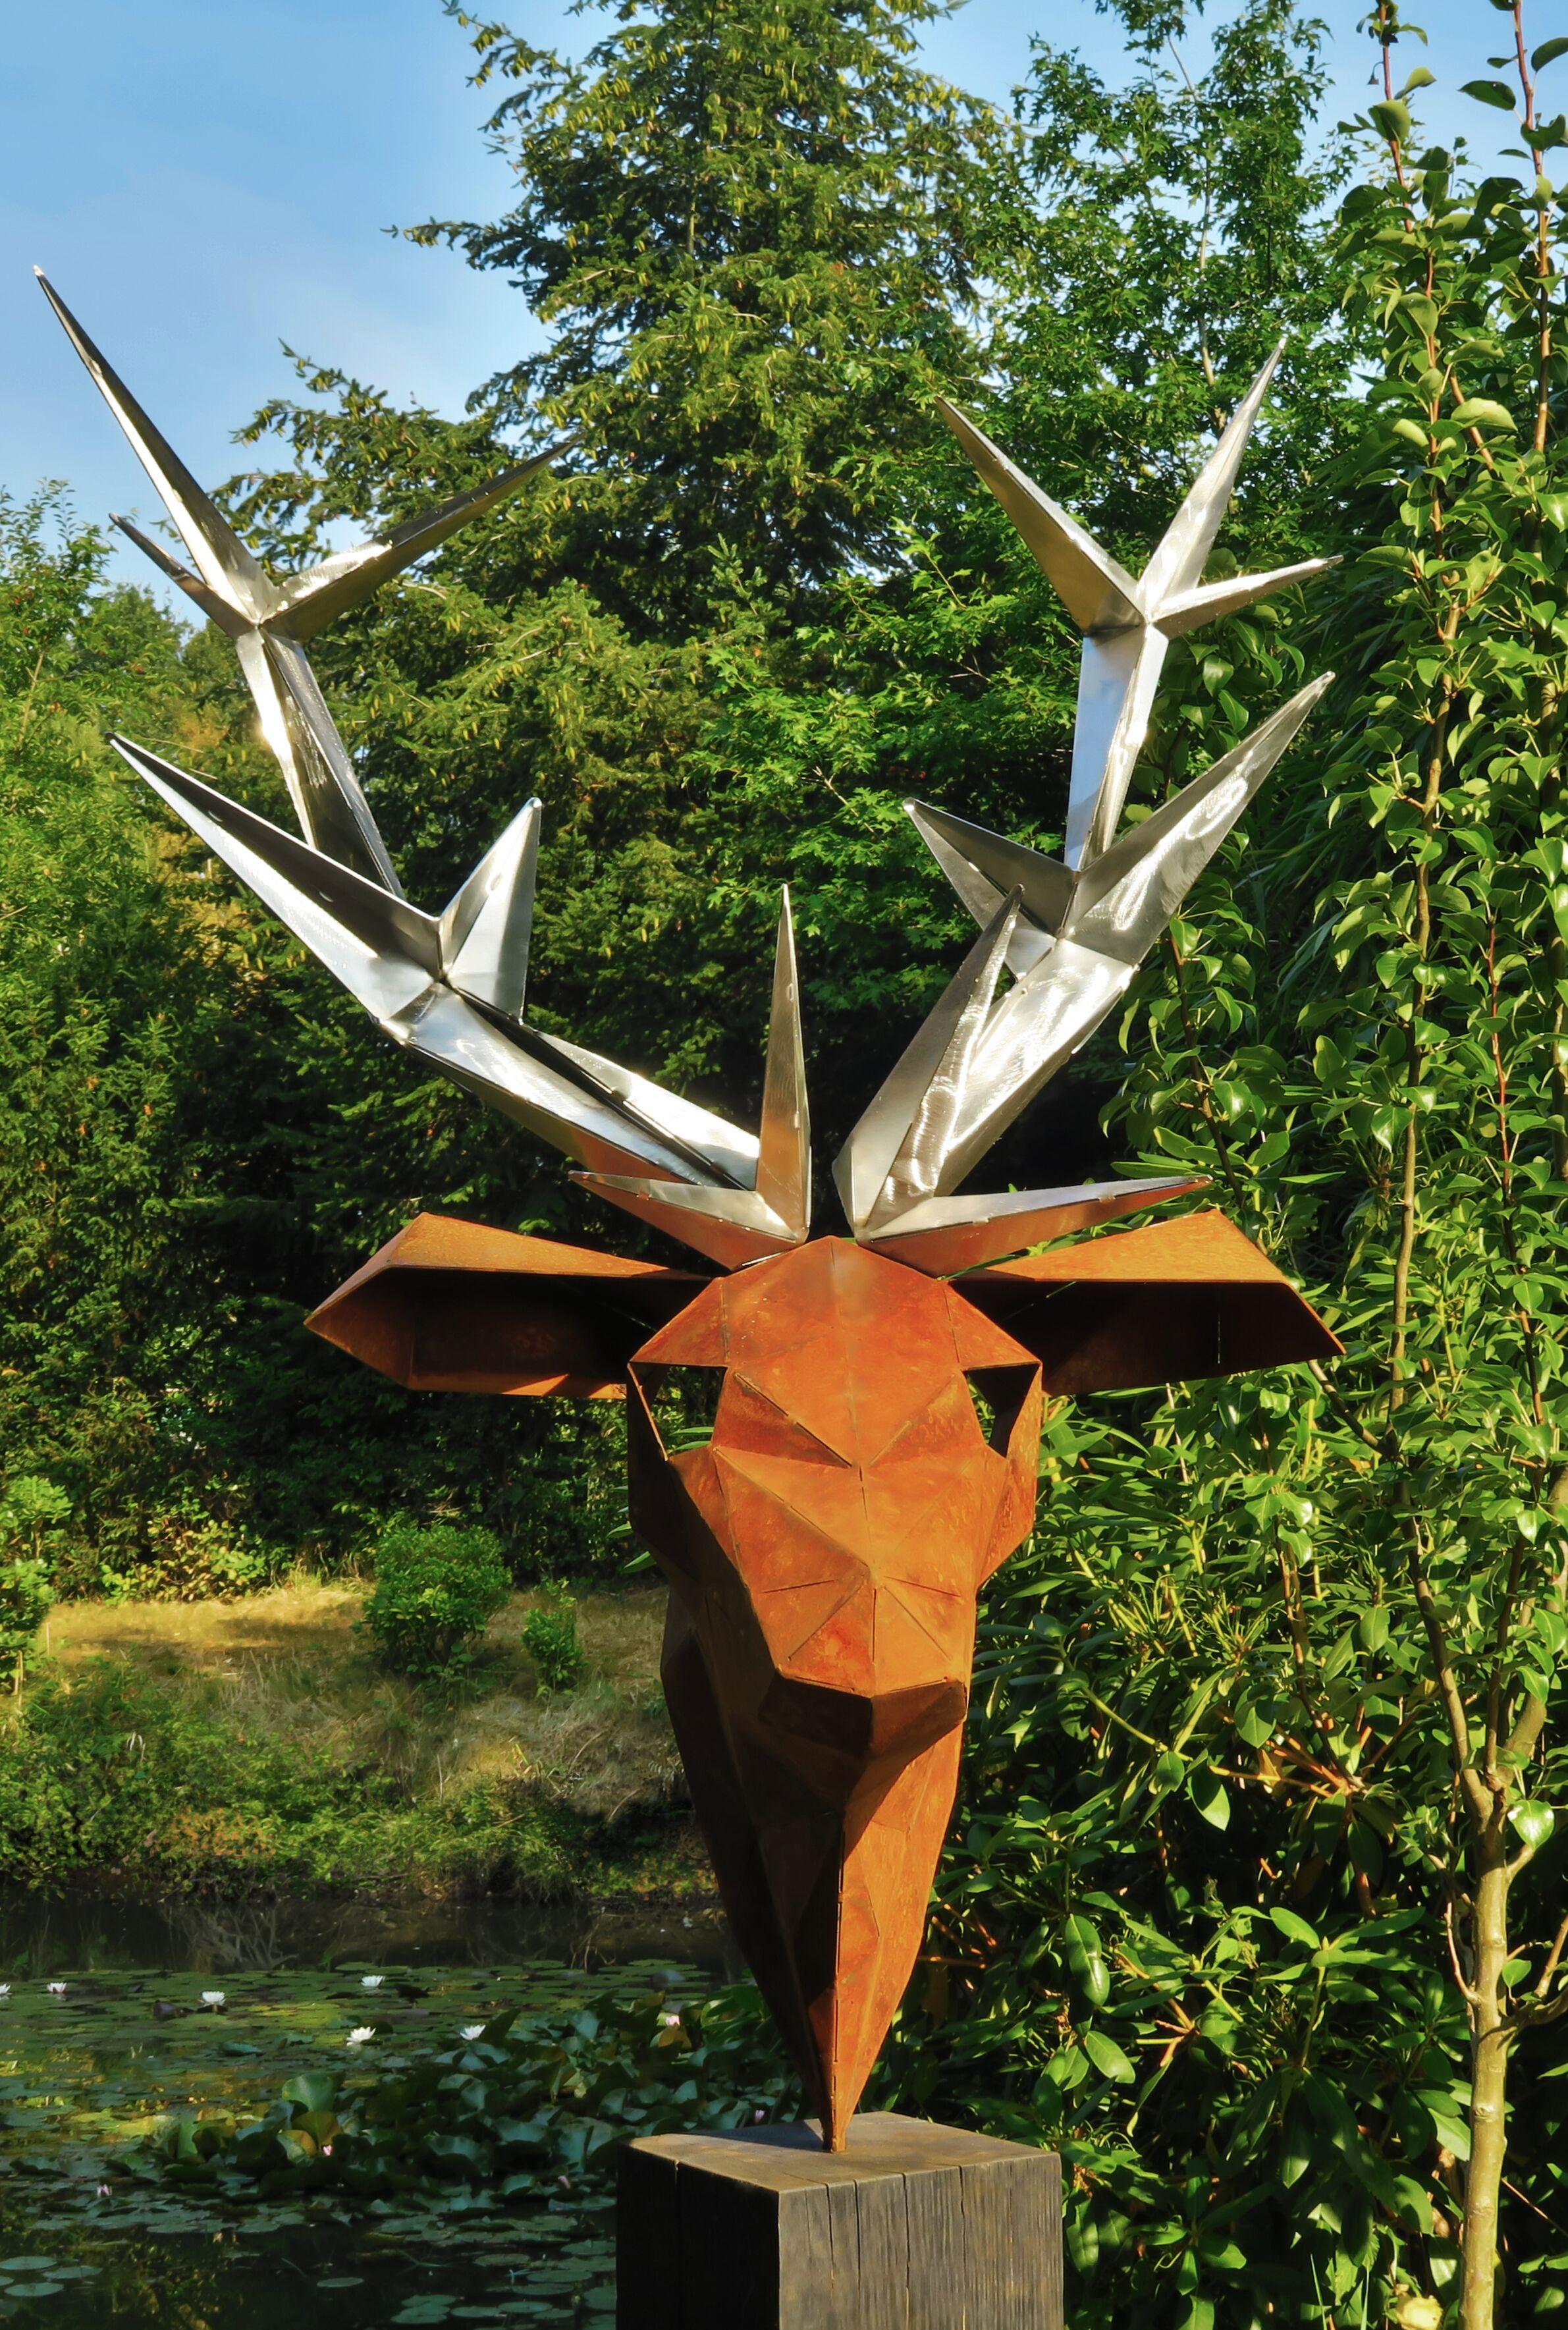 The extraordinary polygon sculpture "Deer" with burner insert on an oxidised oak pedestal for our garden.

In the included burner there are already single lava stones, so this burner can easily be filled with liquid bioethanol and ignited